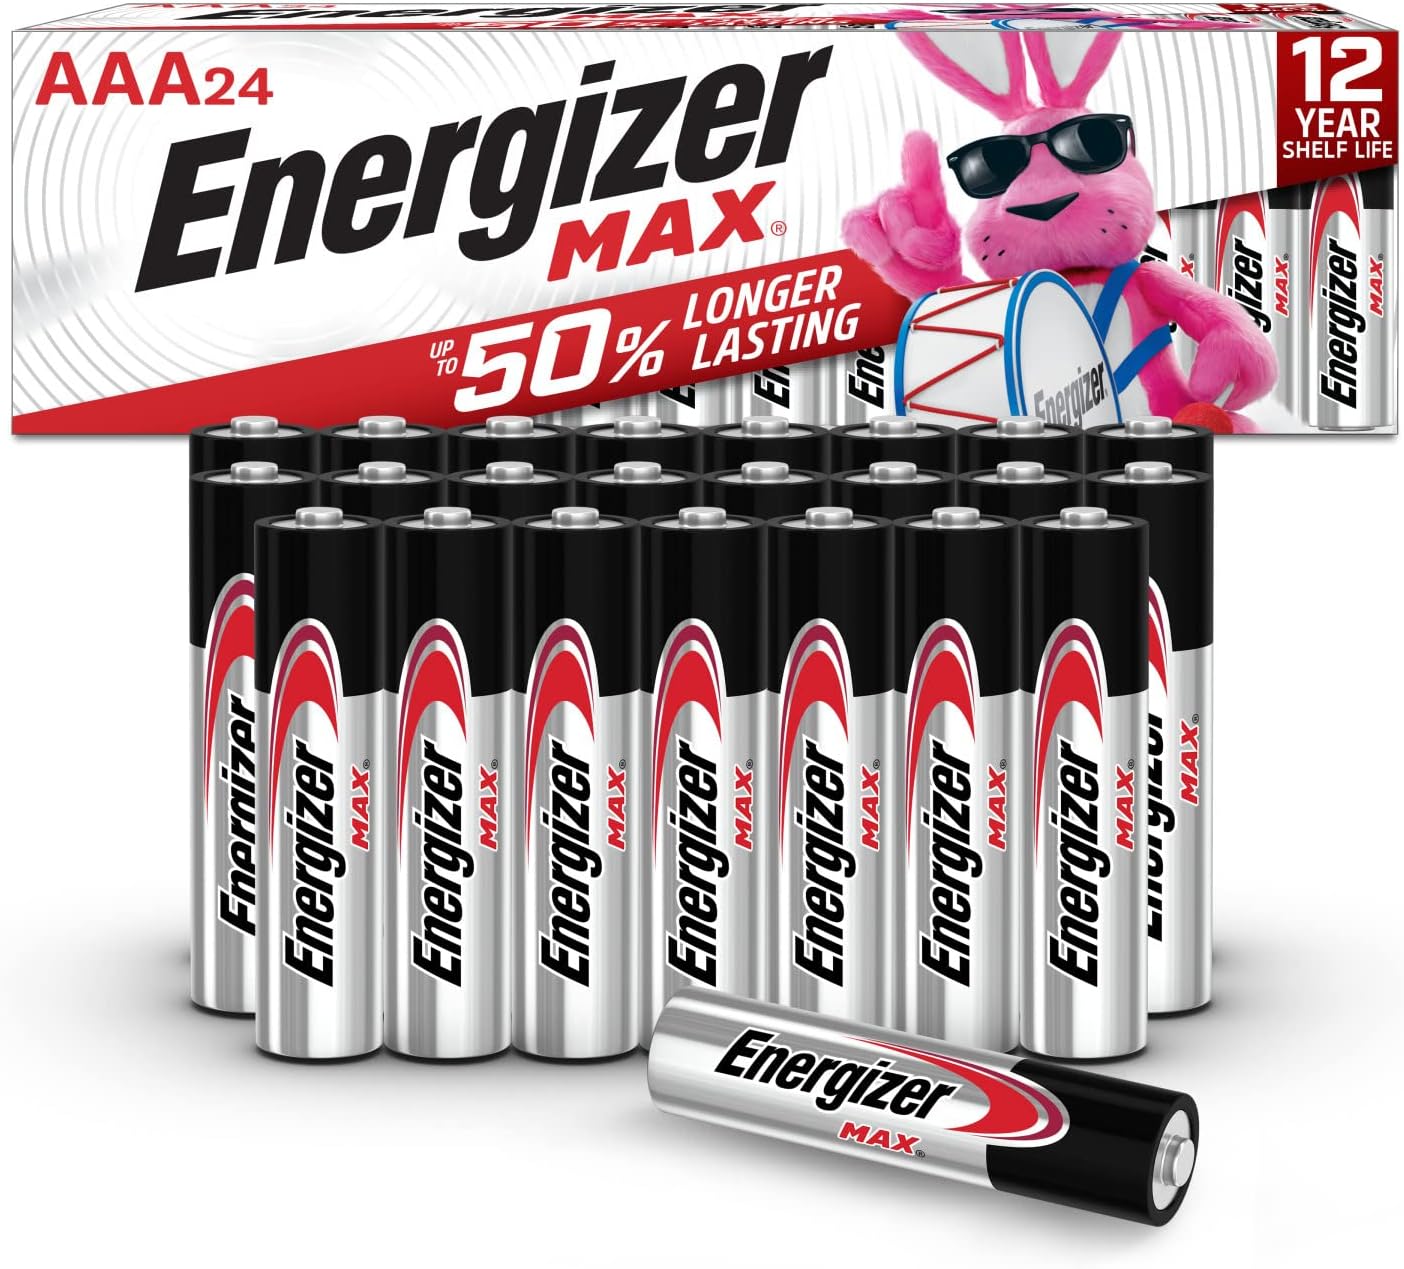 Energizer AAA Batteries - Max Triple A Max Battery Alkaline - 24 Count